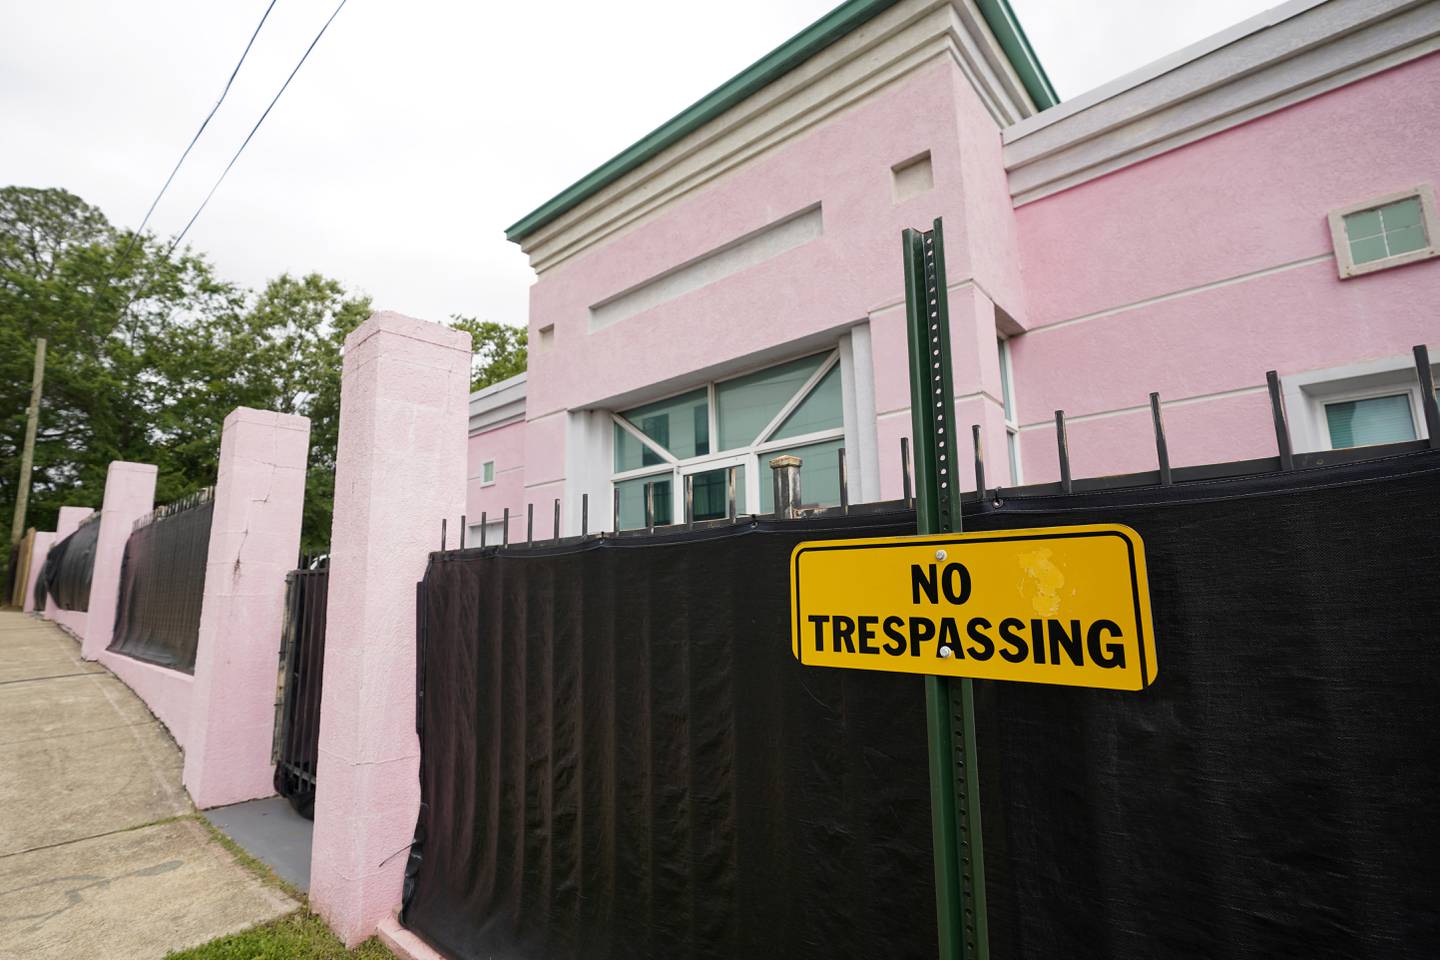 FILE - In this May 19, 2021, file photo, the Jackson Women's Health Organization clinic, more commonly known as "The Pink House," is shrouded with a black tarp so that its clients may enter in privacy in Jackson, Miss. The Mississippi attorney general’s office is expected to file briefs with the U.S. Supreme Court on Thursday to outline the state’s arguments in a case that could upend nearly 50 years of court rulings on abortion rights nationwide. (AP Photo/Rogelio V. Solis, File)